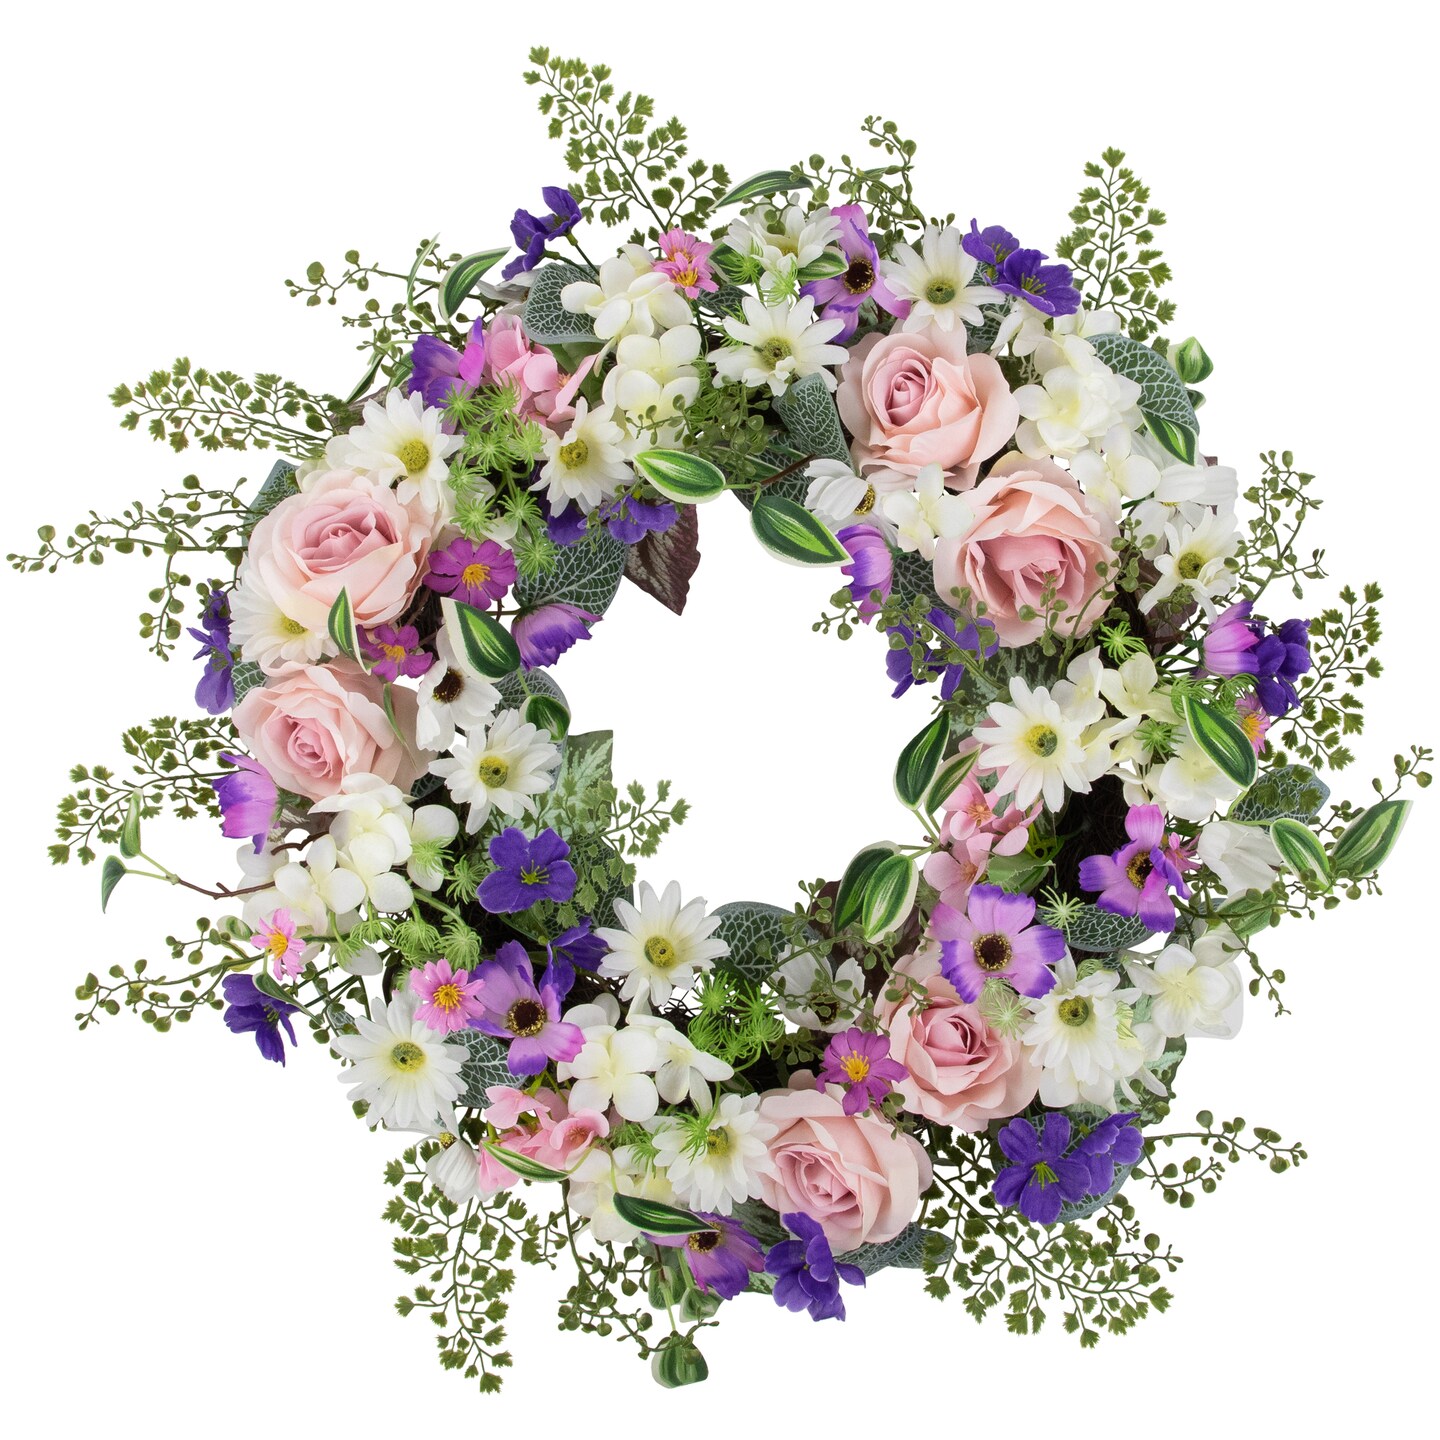 Northlight Mixed Floral and Fern Artificial Spring Wreath, 24-Inch